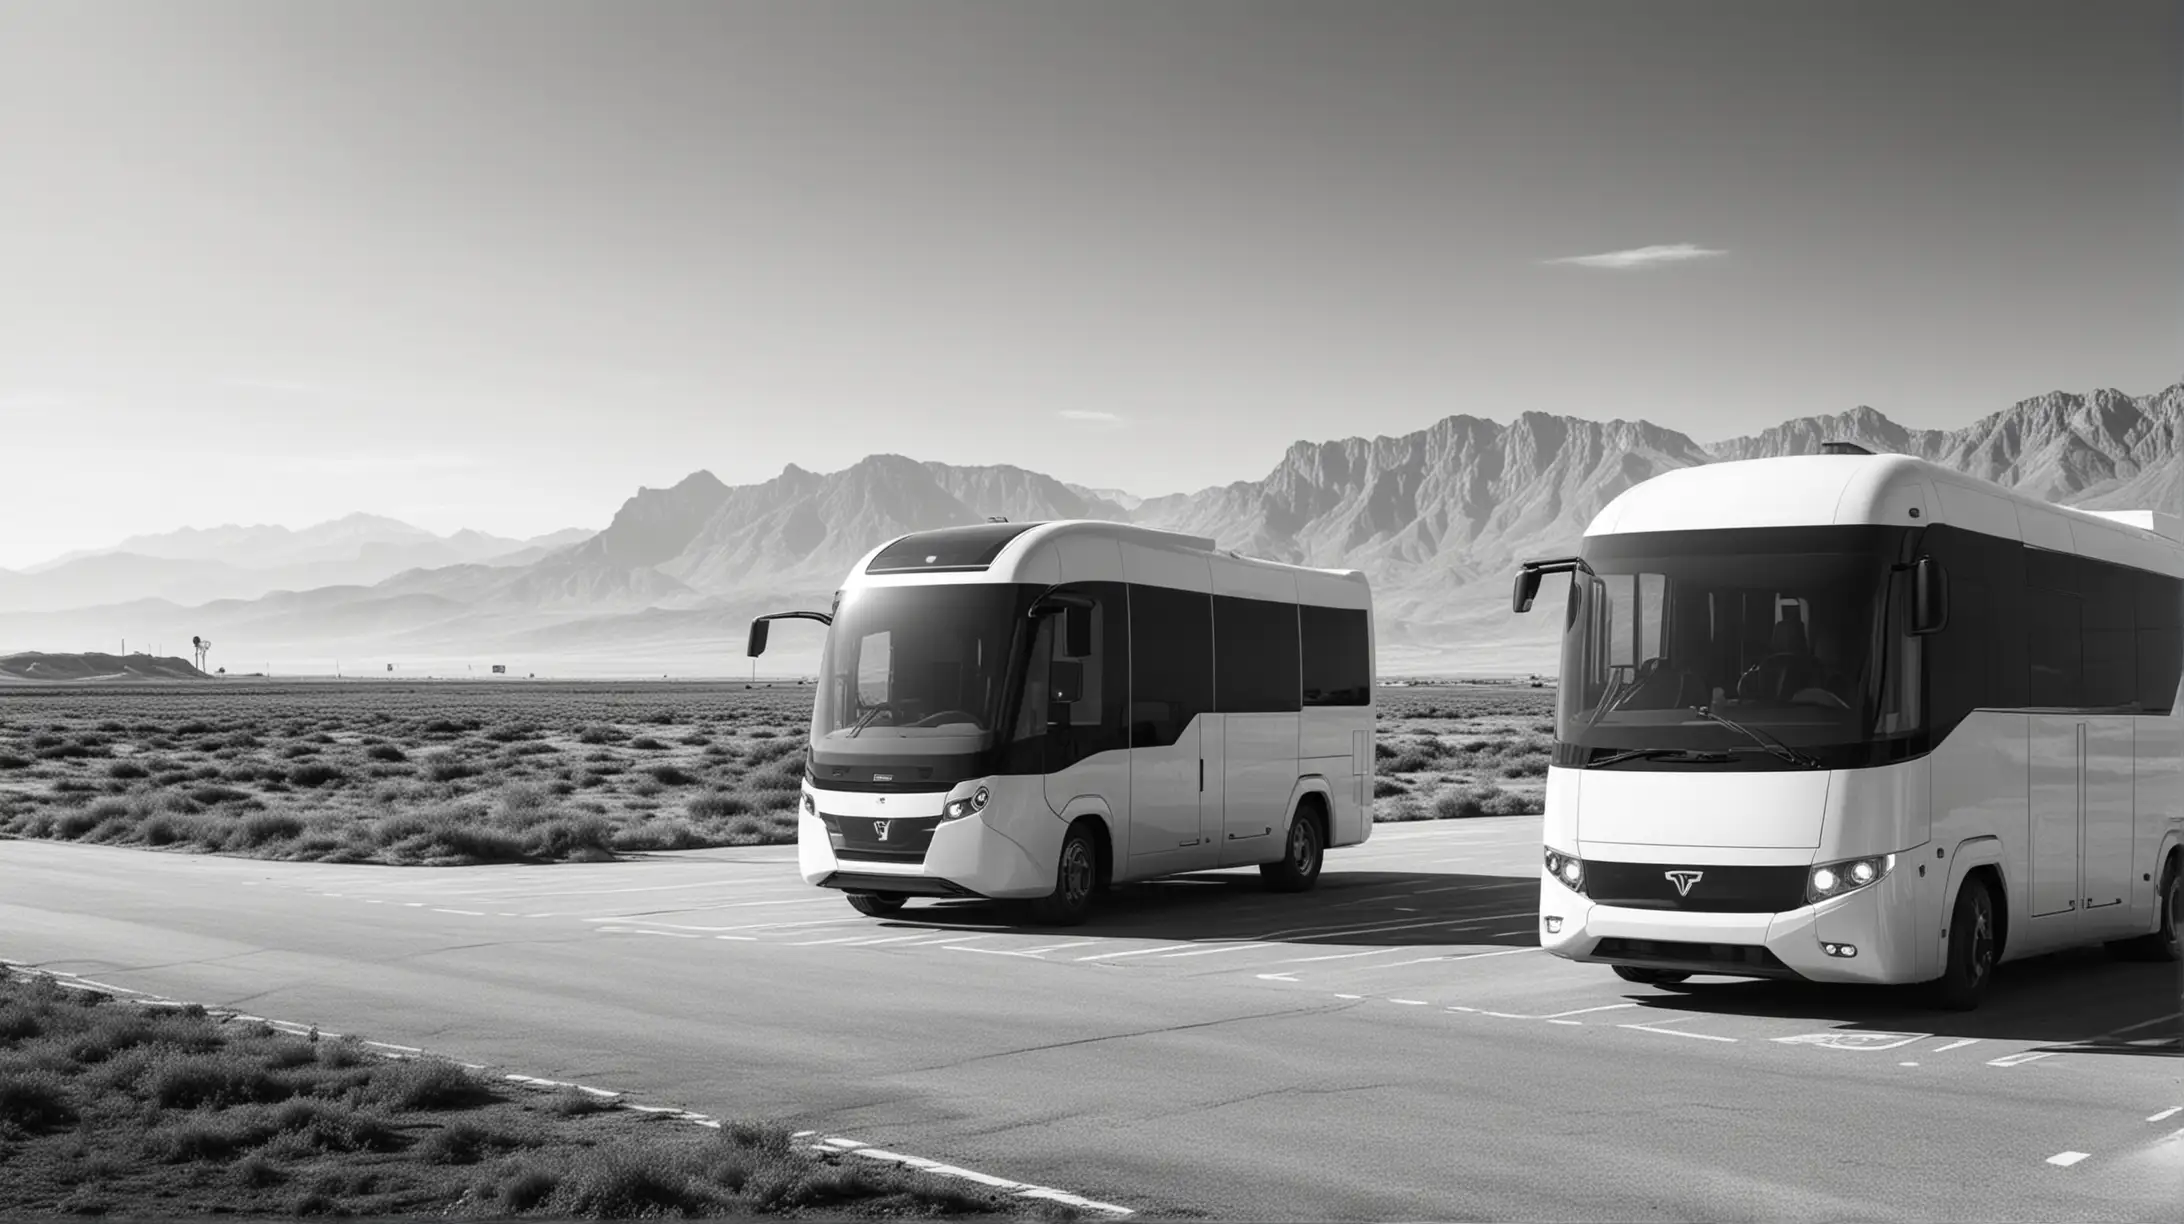 Futuristic minimalist electric van and bus, parking by the road side in front of vast landscape, black and white